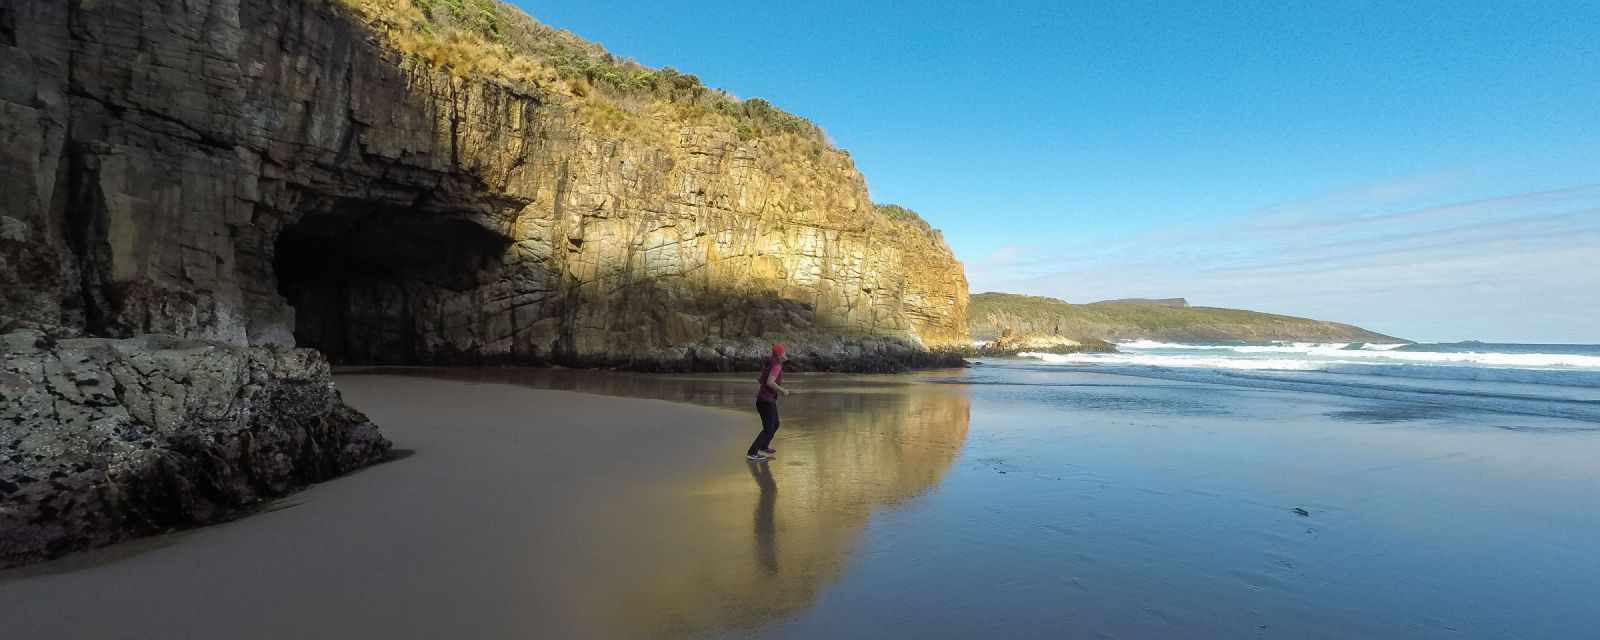 Tide Times and Tips for the Remarkable Cave at Port Arthur